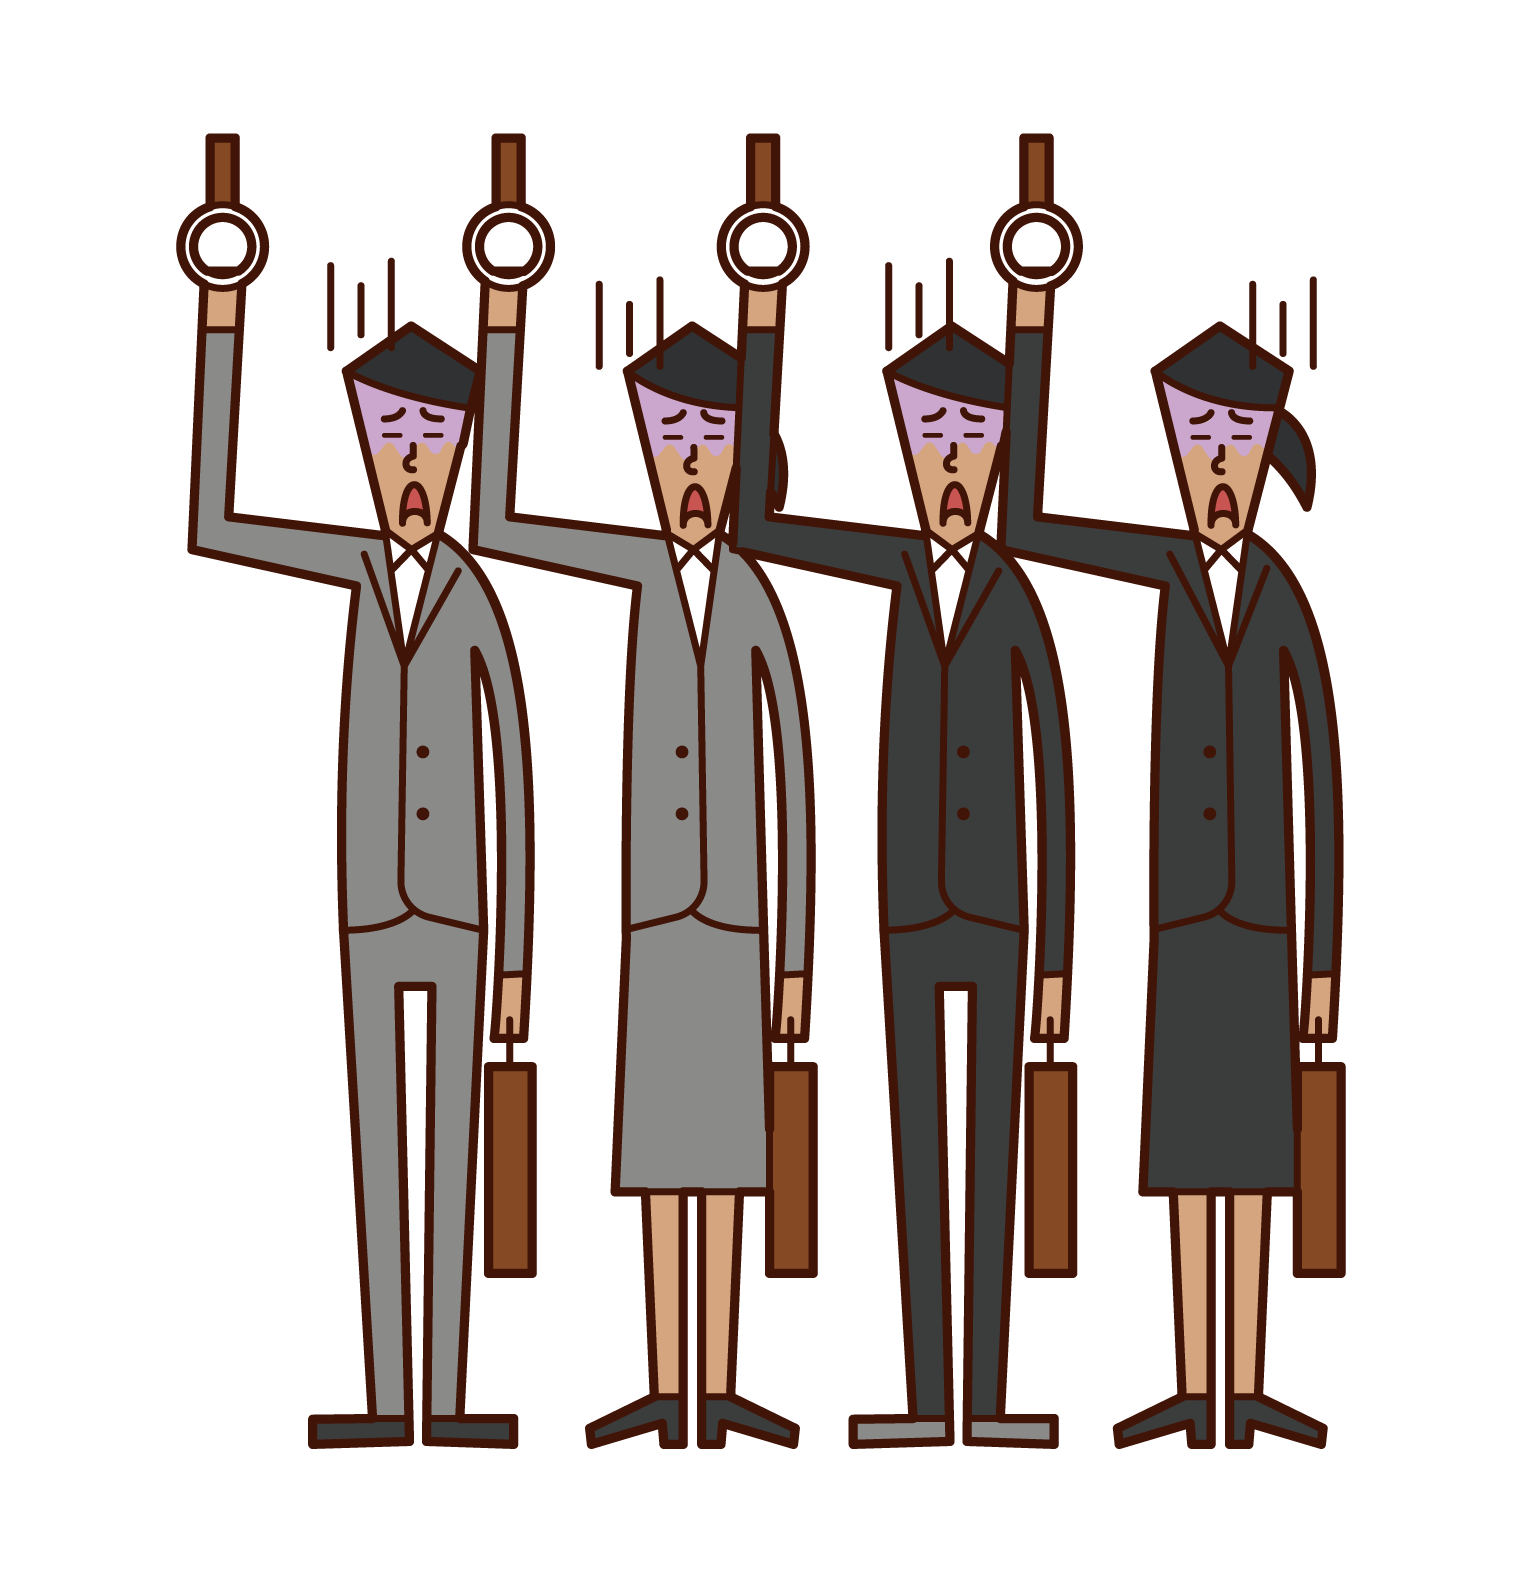 Illustration of people riding a crowded train